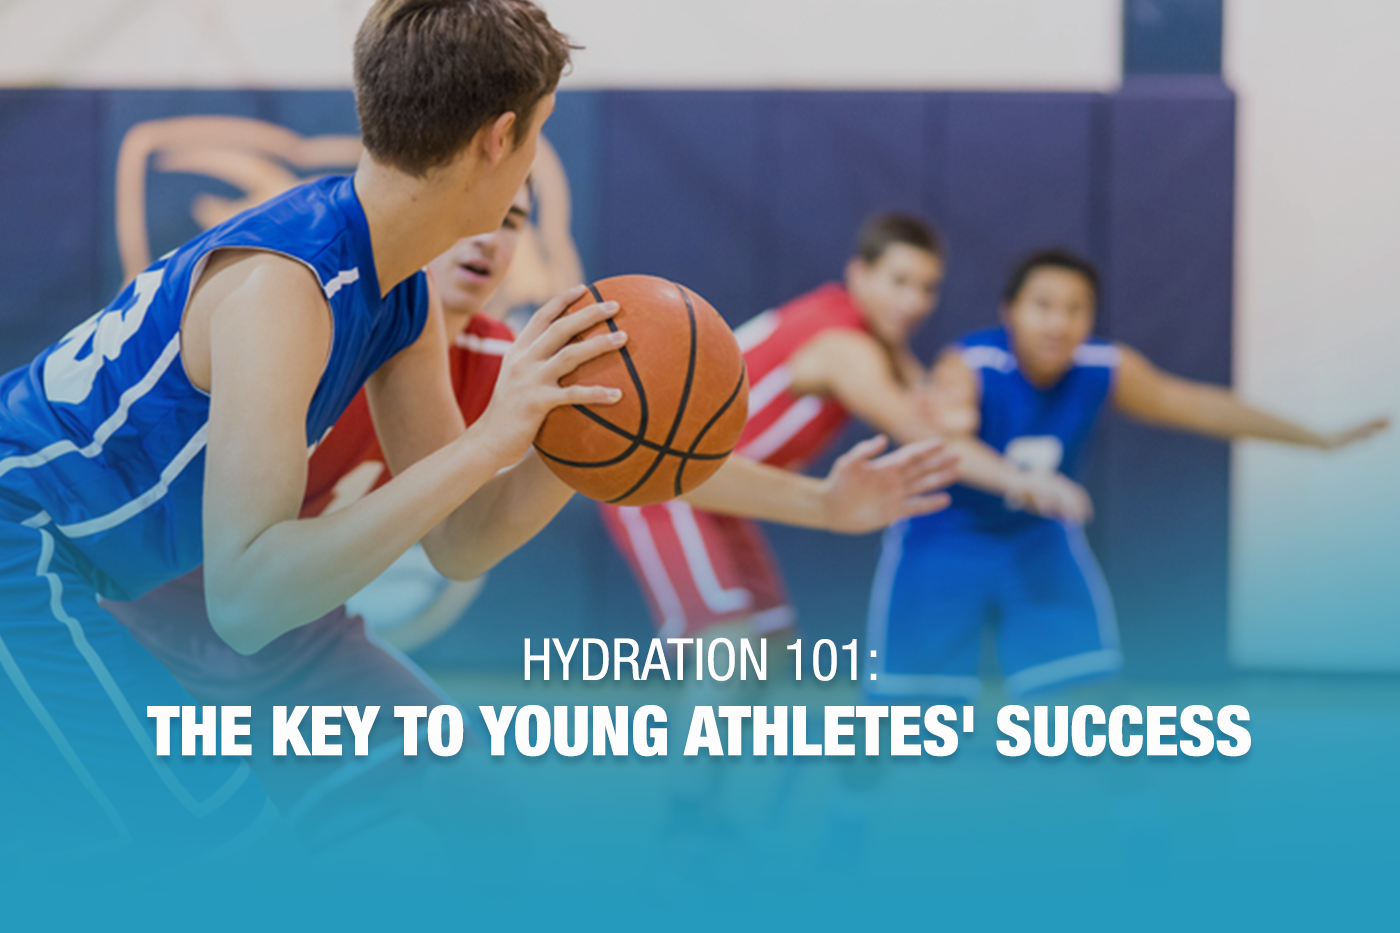 Hydration habits for aspiring young athletes